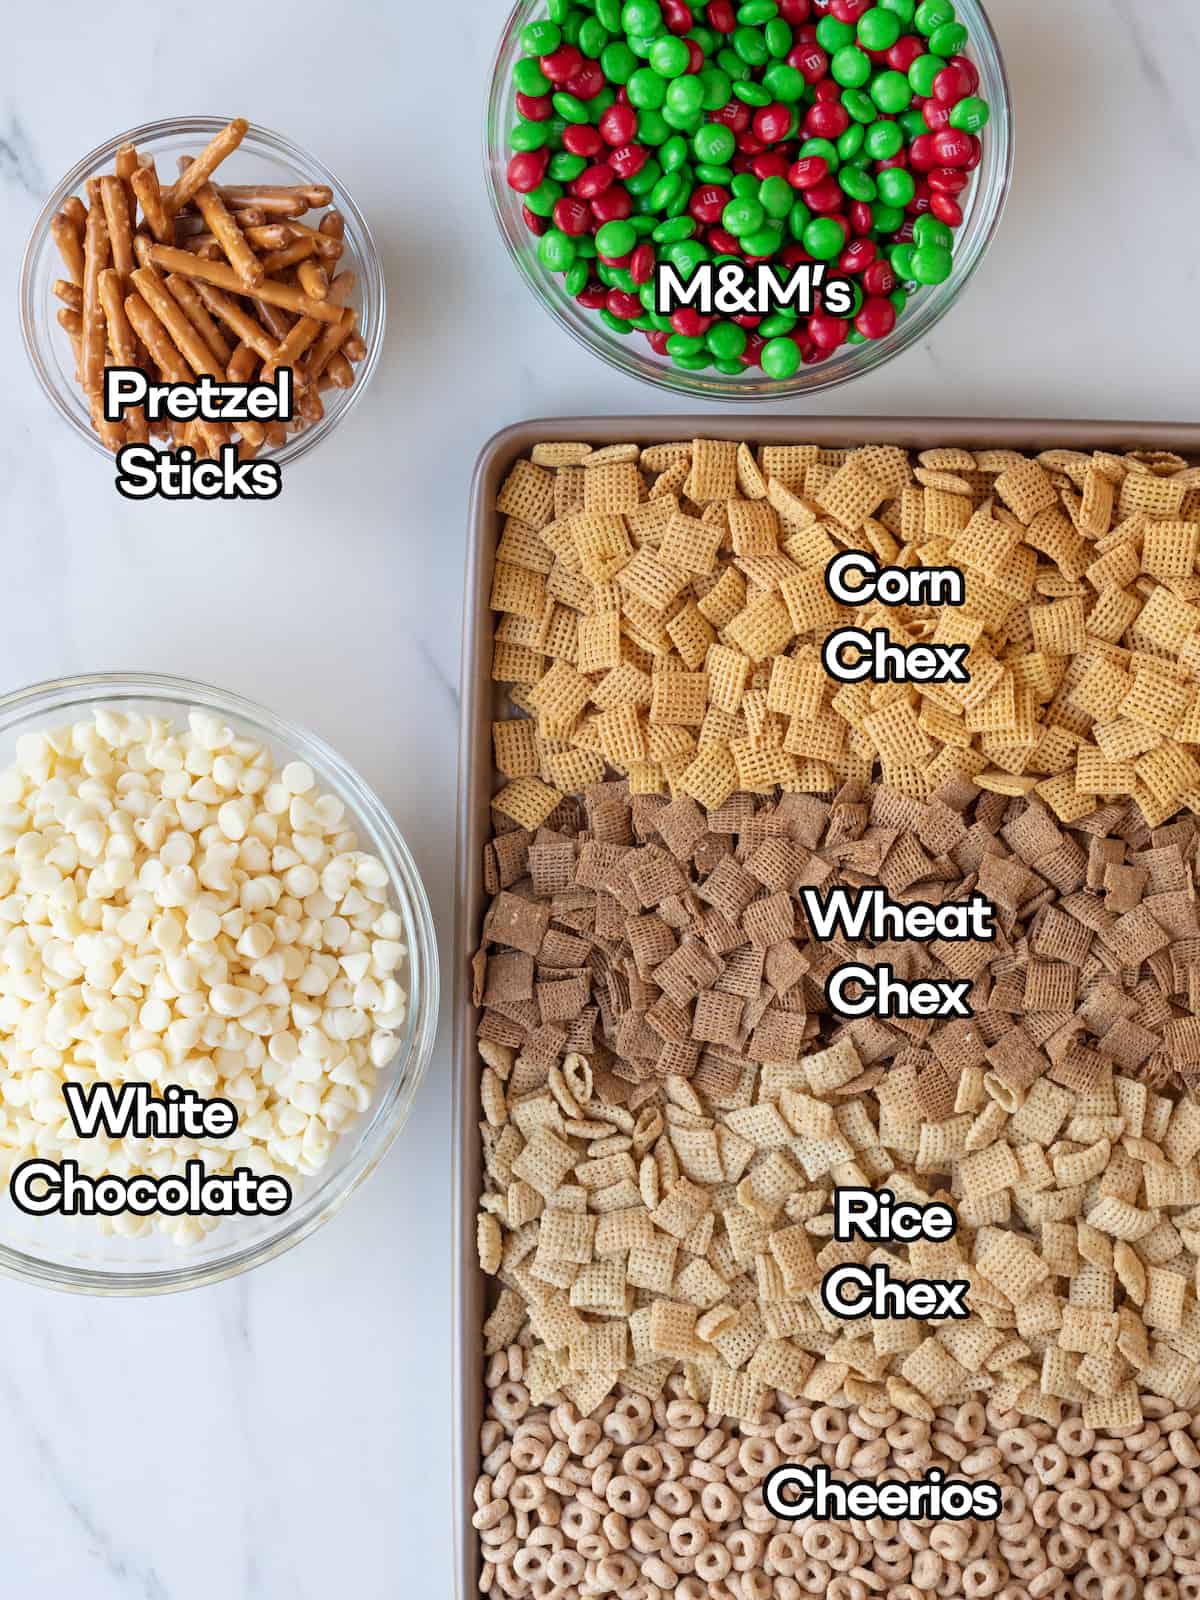 Mise-en-place with all the ingredients required to make Christmas Chex Mix.